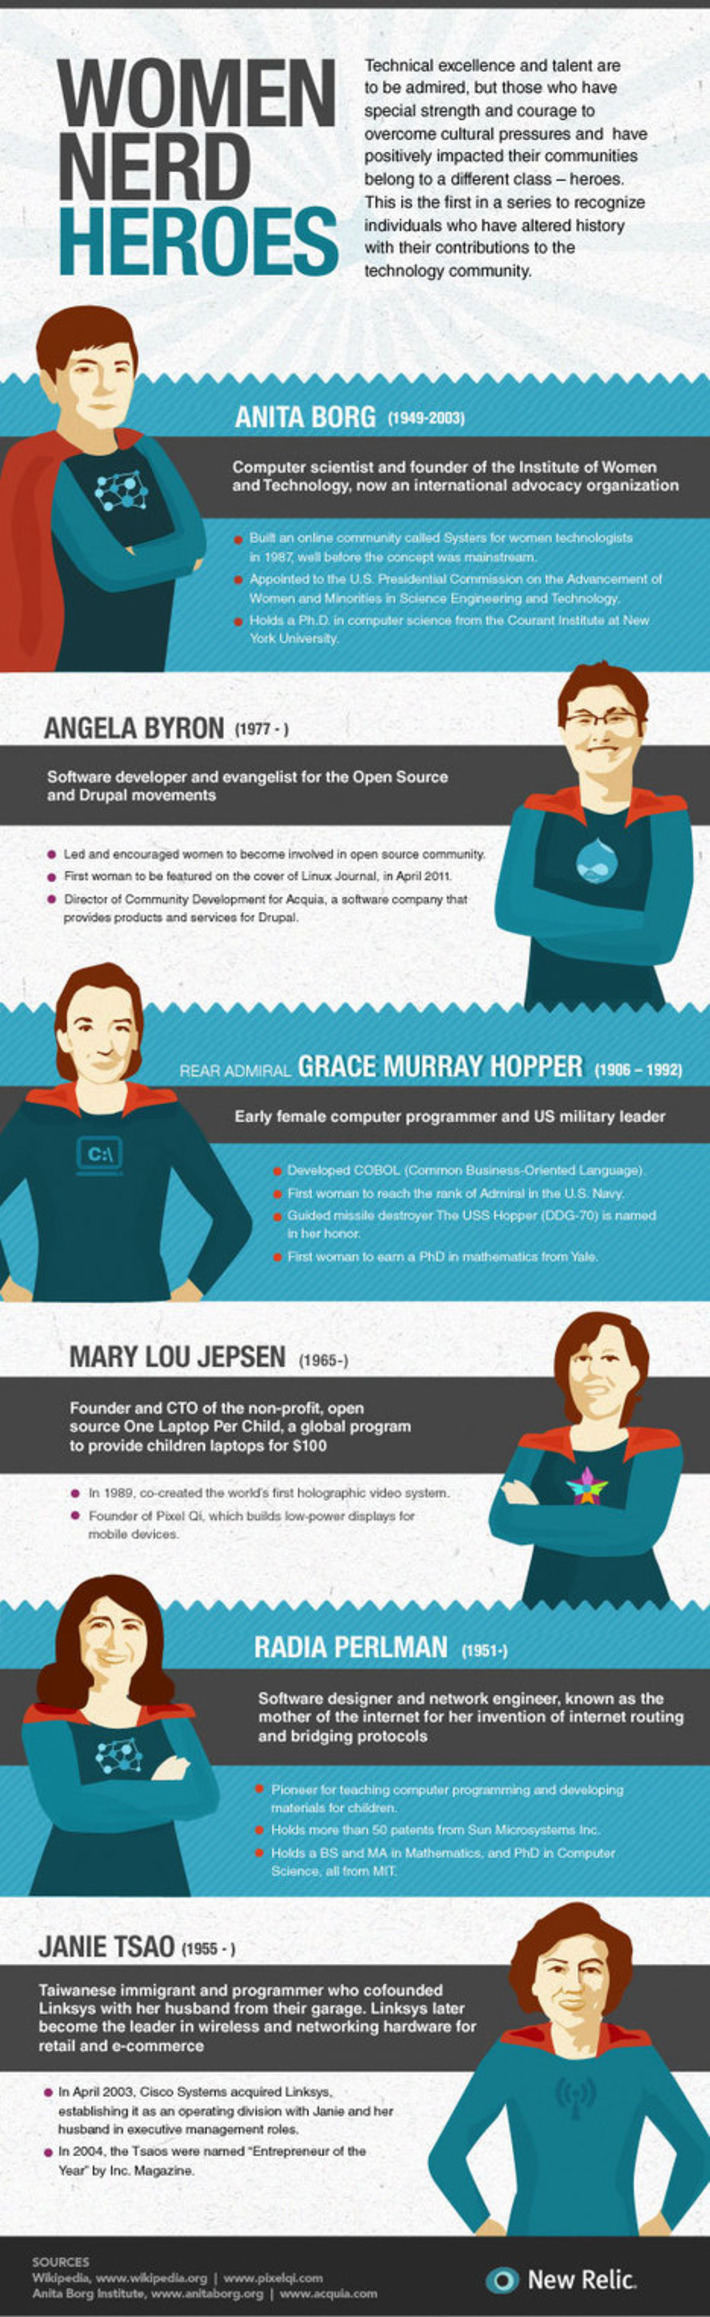 Forget Wonder Woman: These Women Nerds Are Our Real Superheroes | Herstory | Scoop.it